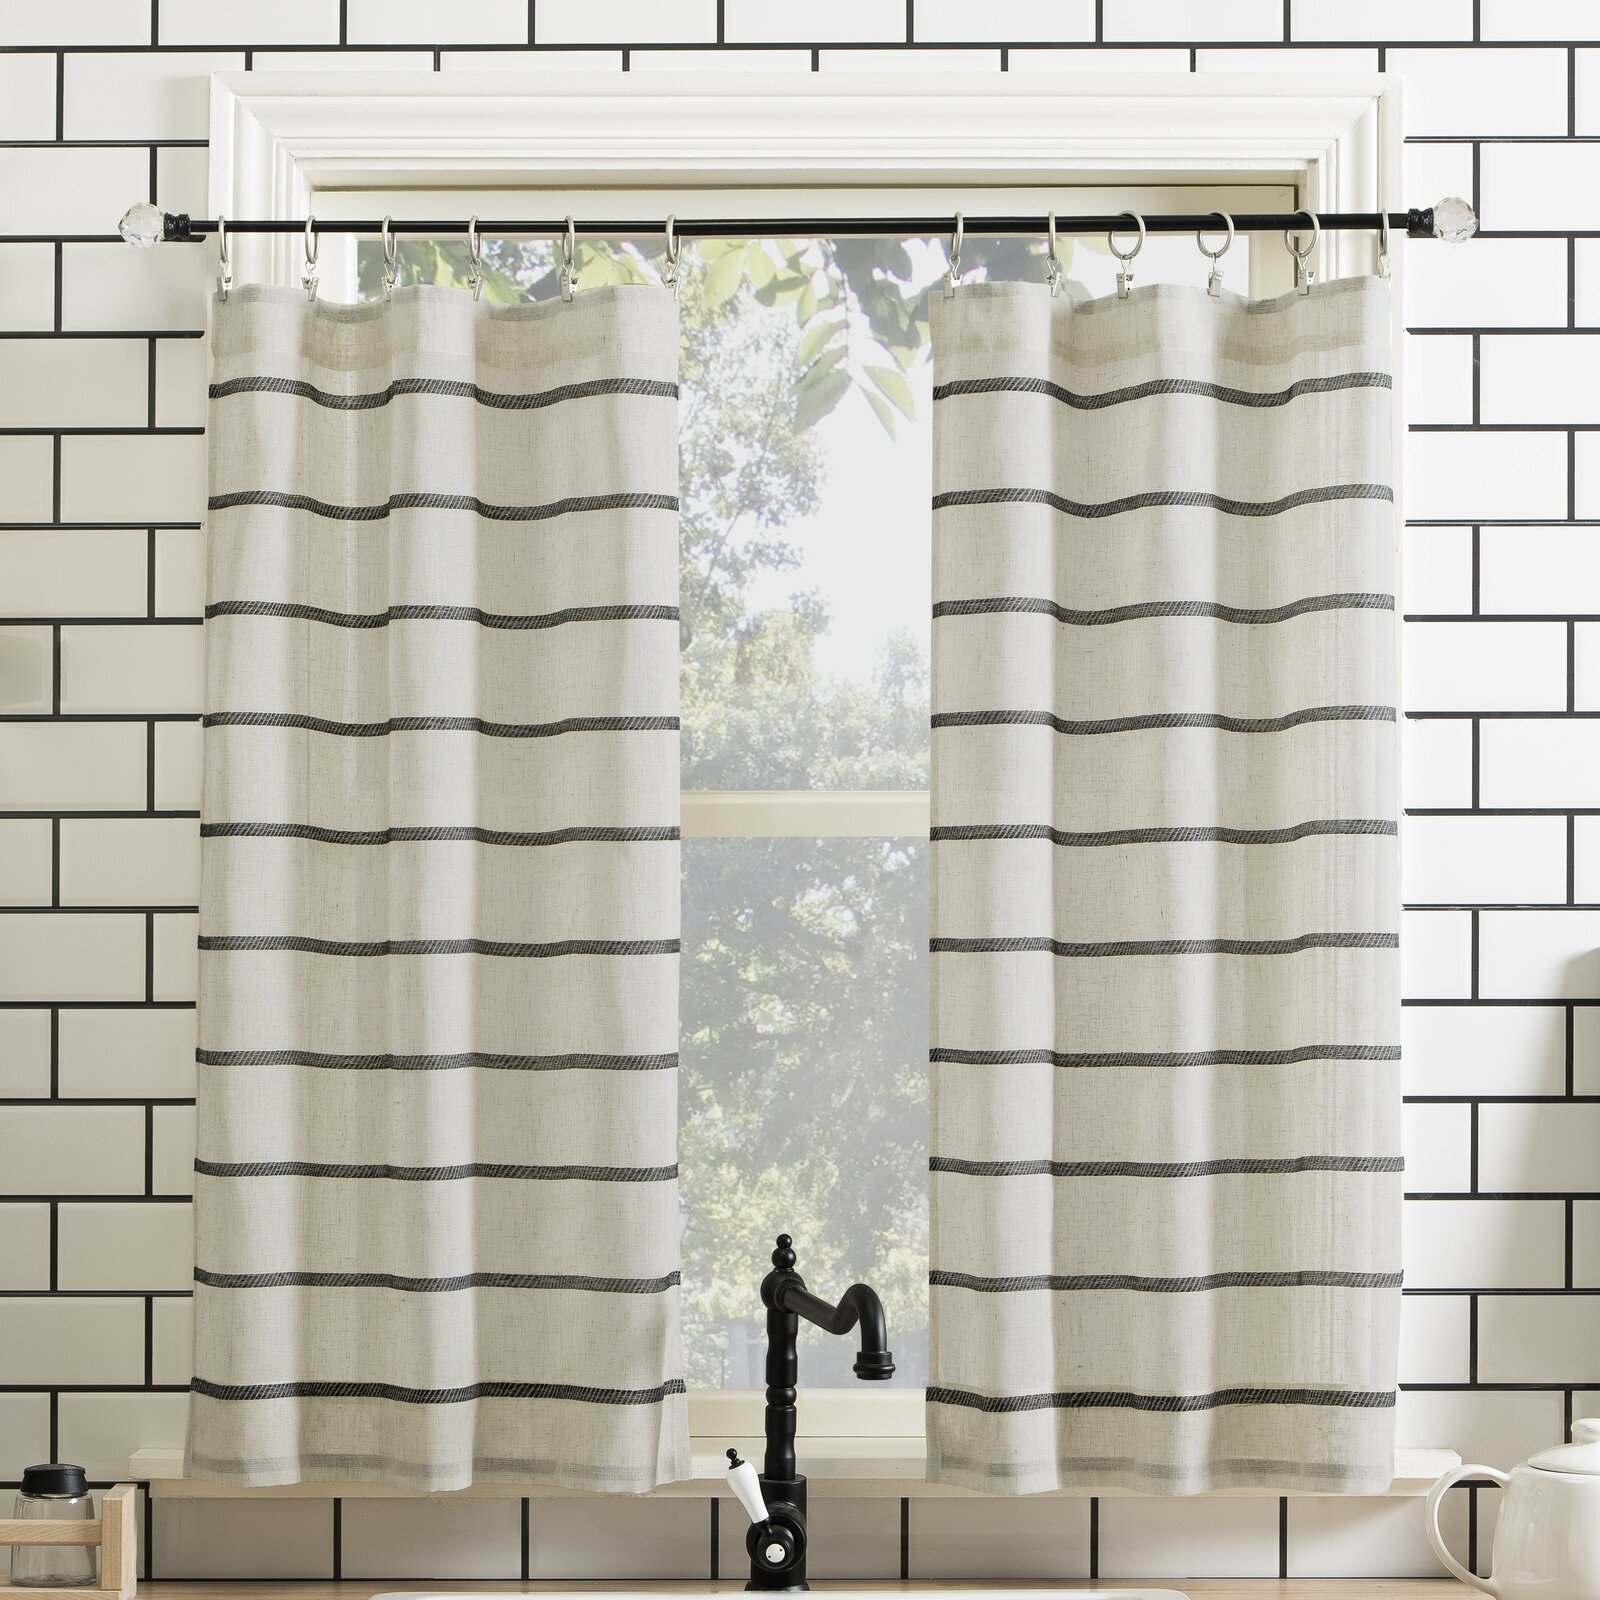 Striped waterproof curtains for shower window